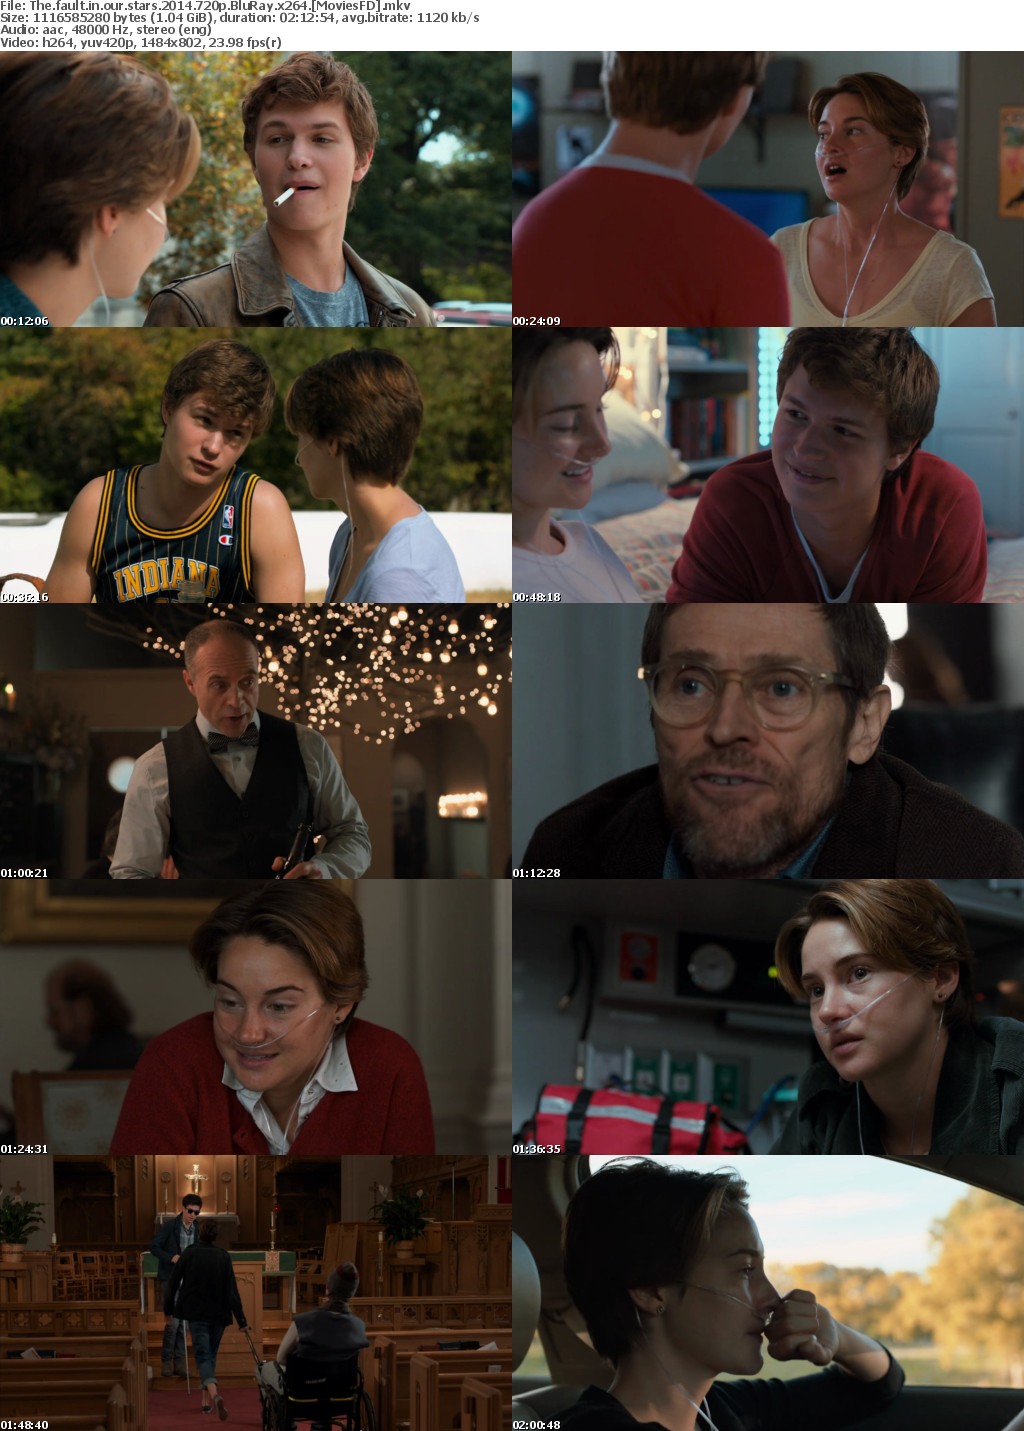 The Fault in Our Stars (2014) 720p BluRay x264 - MoviesFD